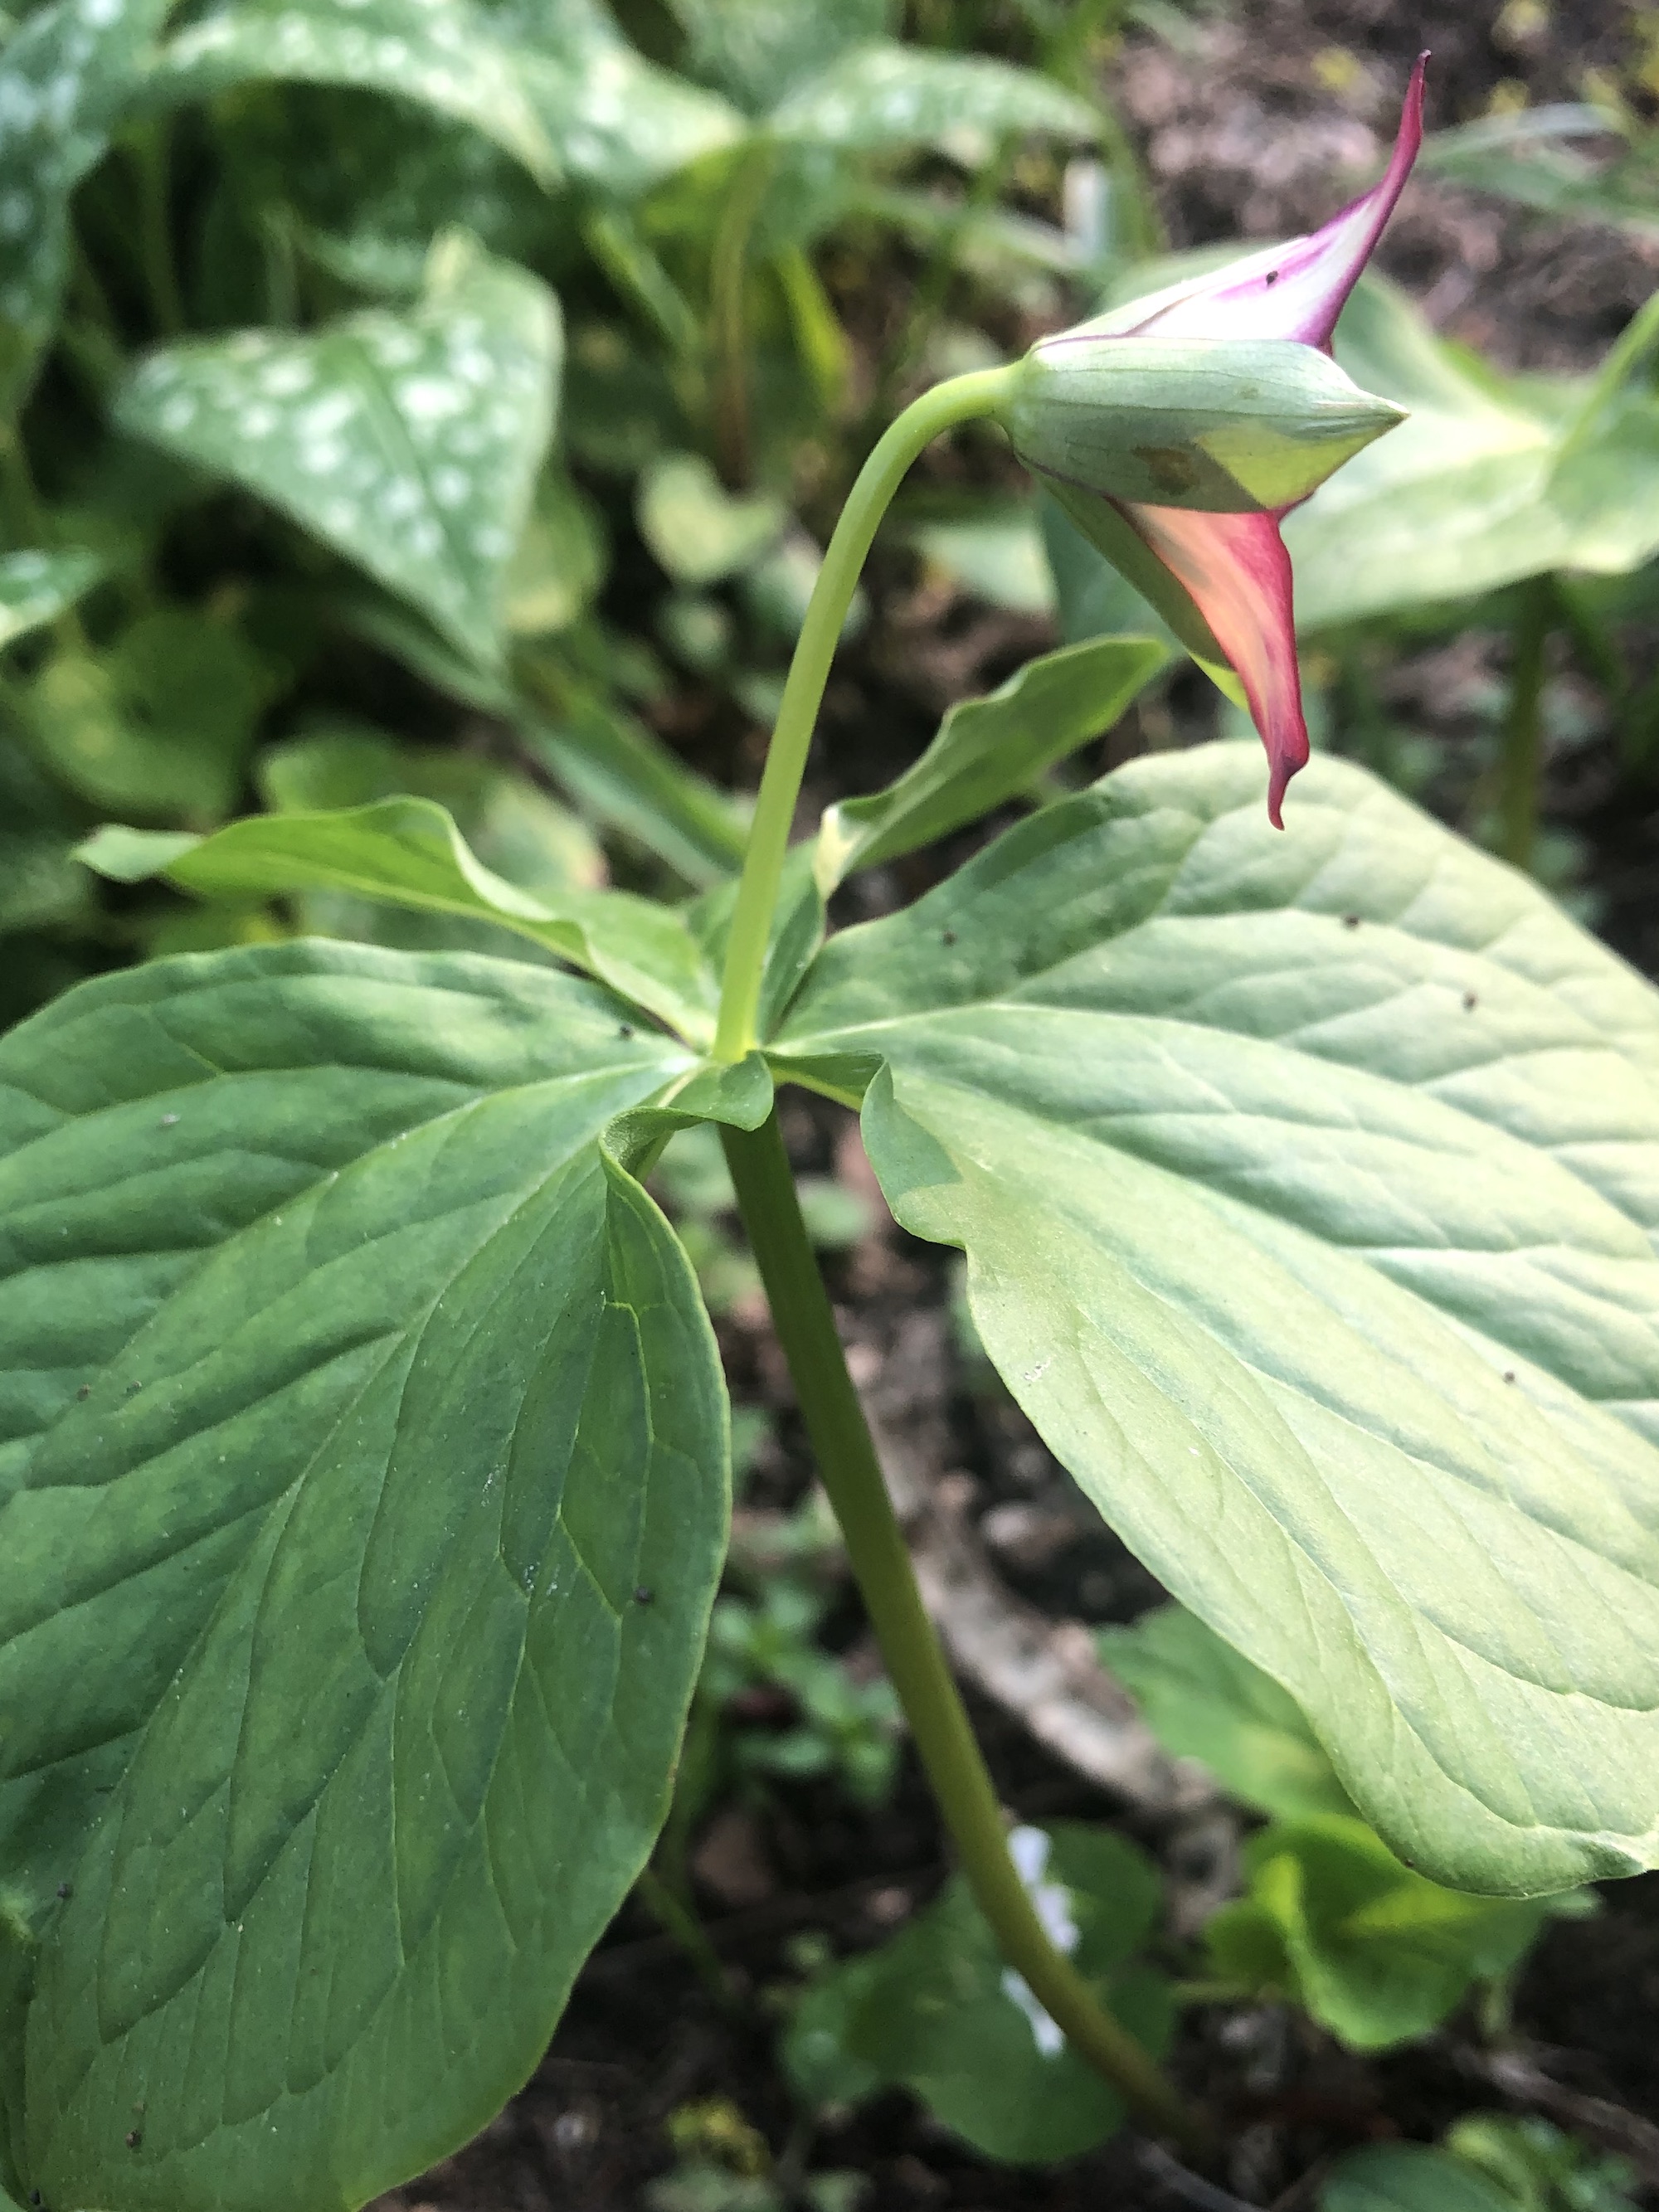 Red Trillium in Nakoma garden in Madison, Wisconsin on May 11, 2022.